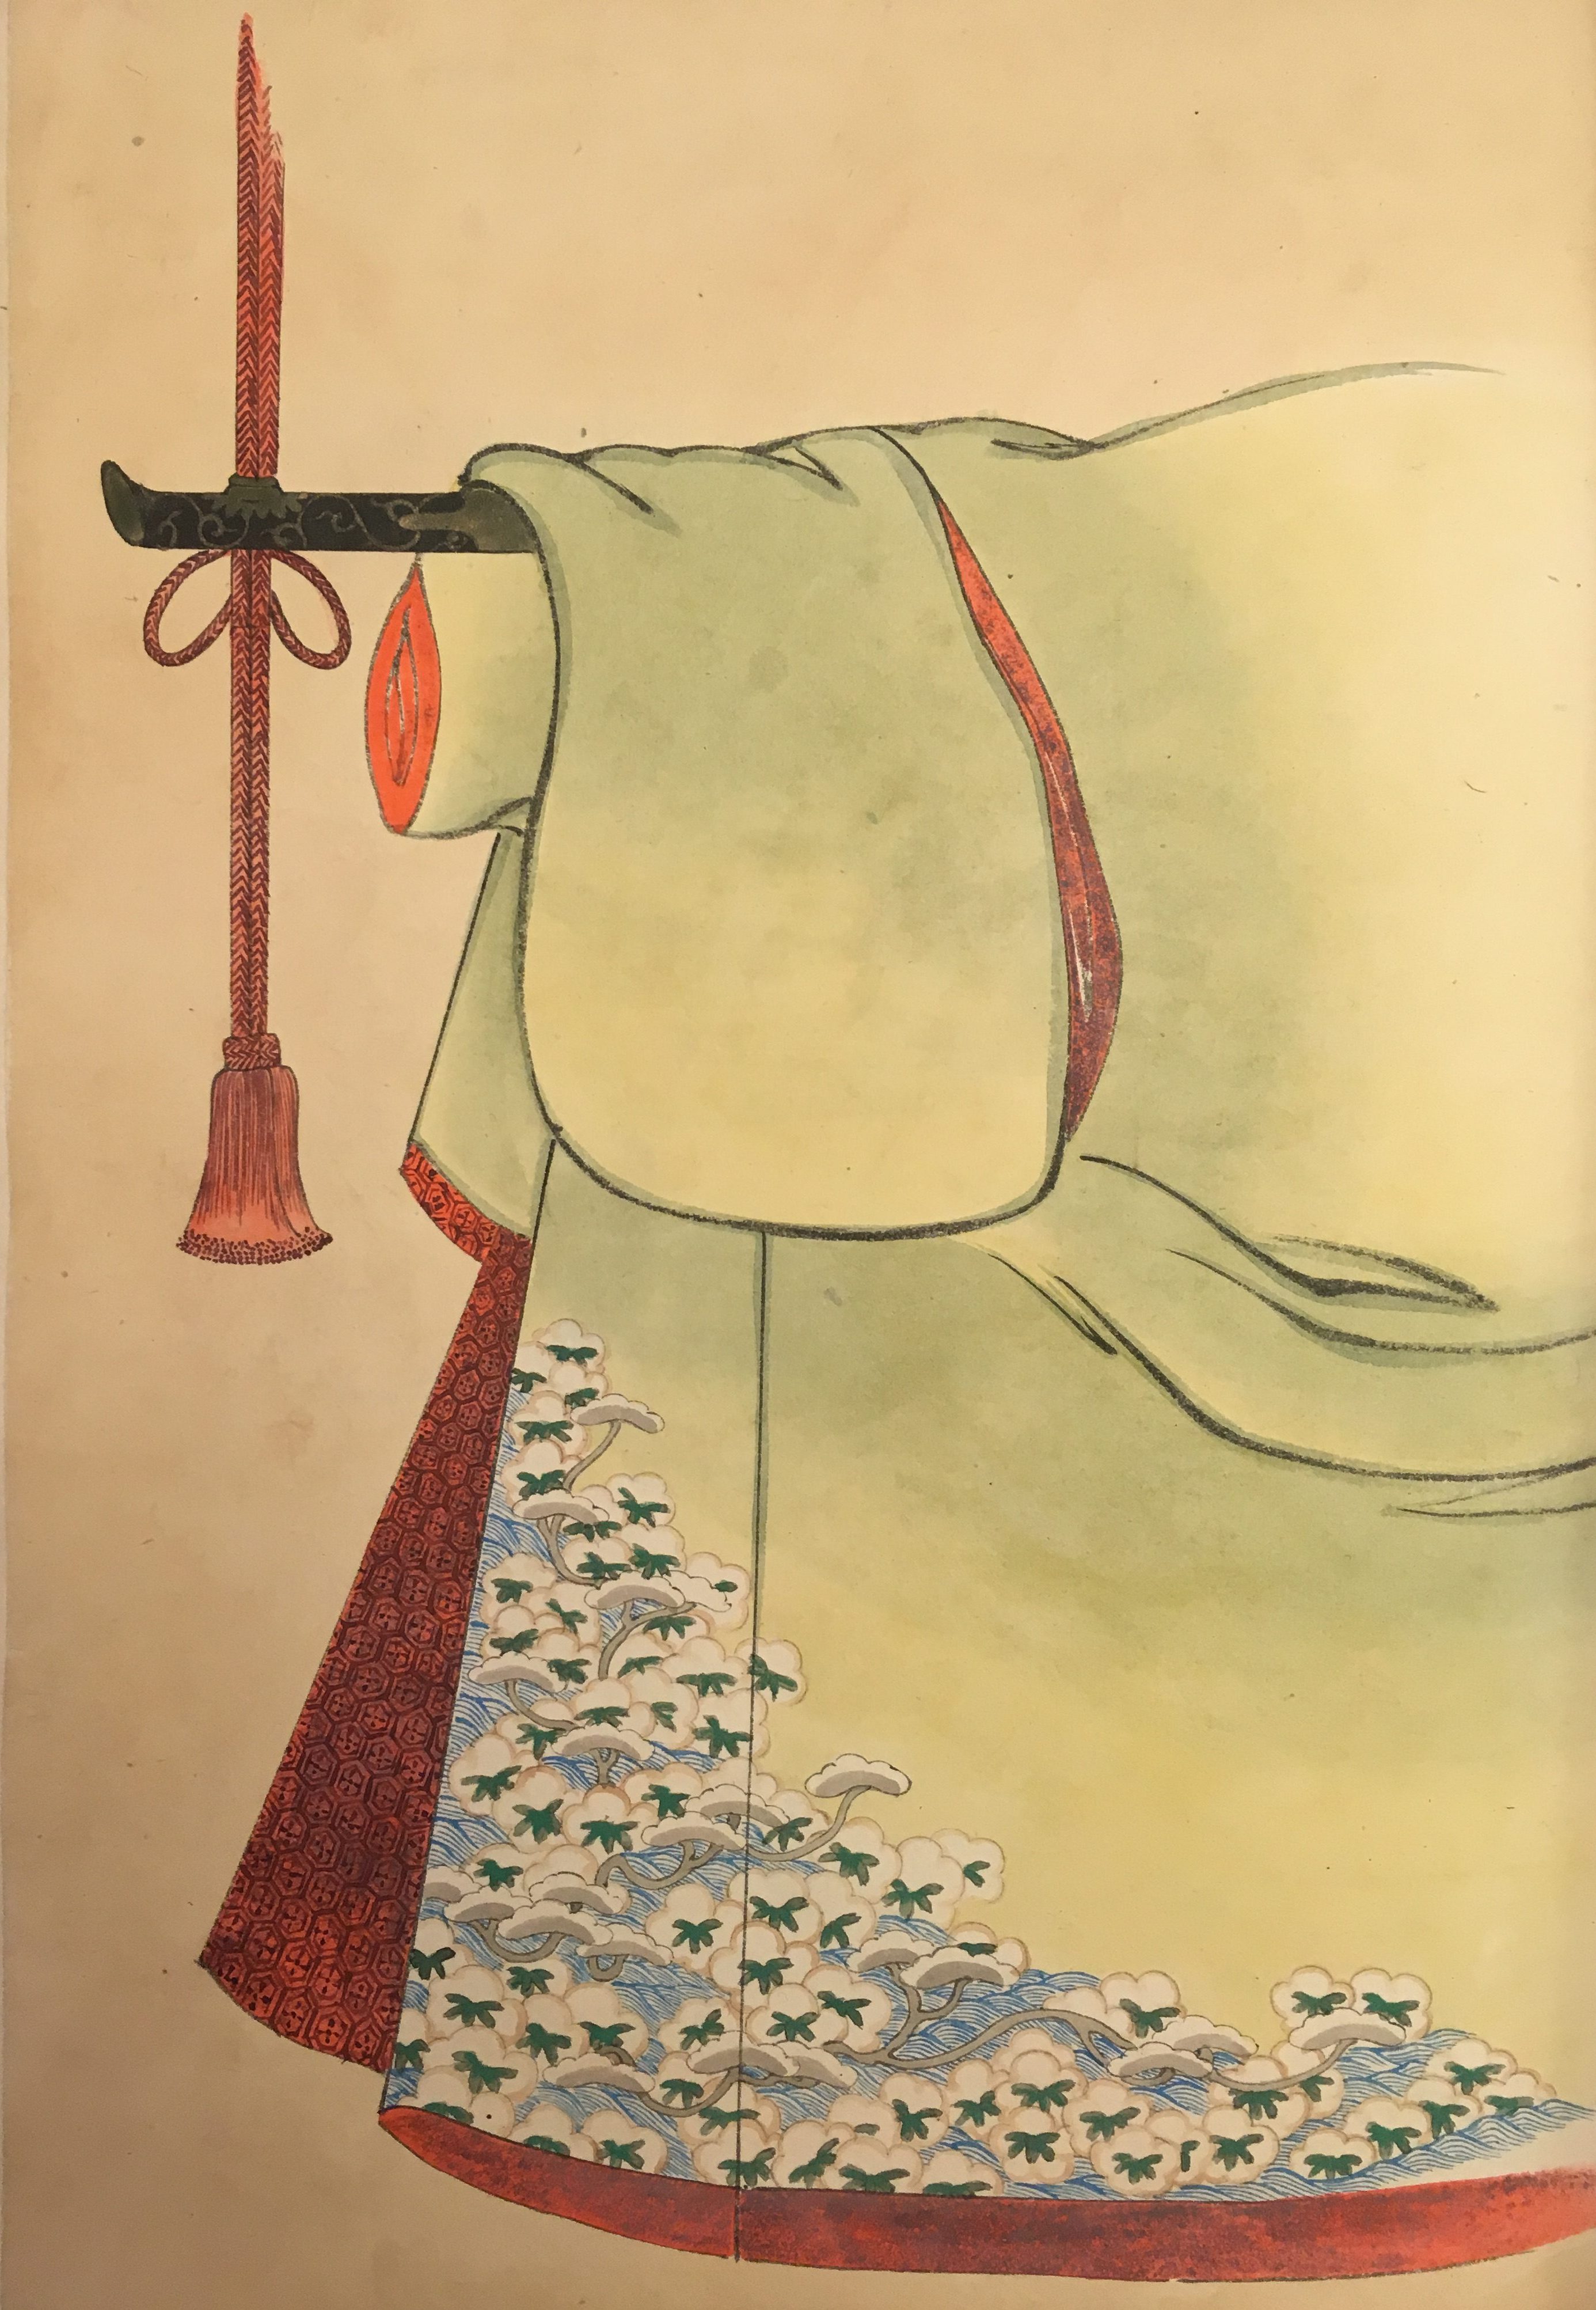 A light green kimono design. The interior is red, and the lower outside pattern appears to depict snow-capped trees.